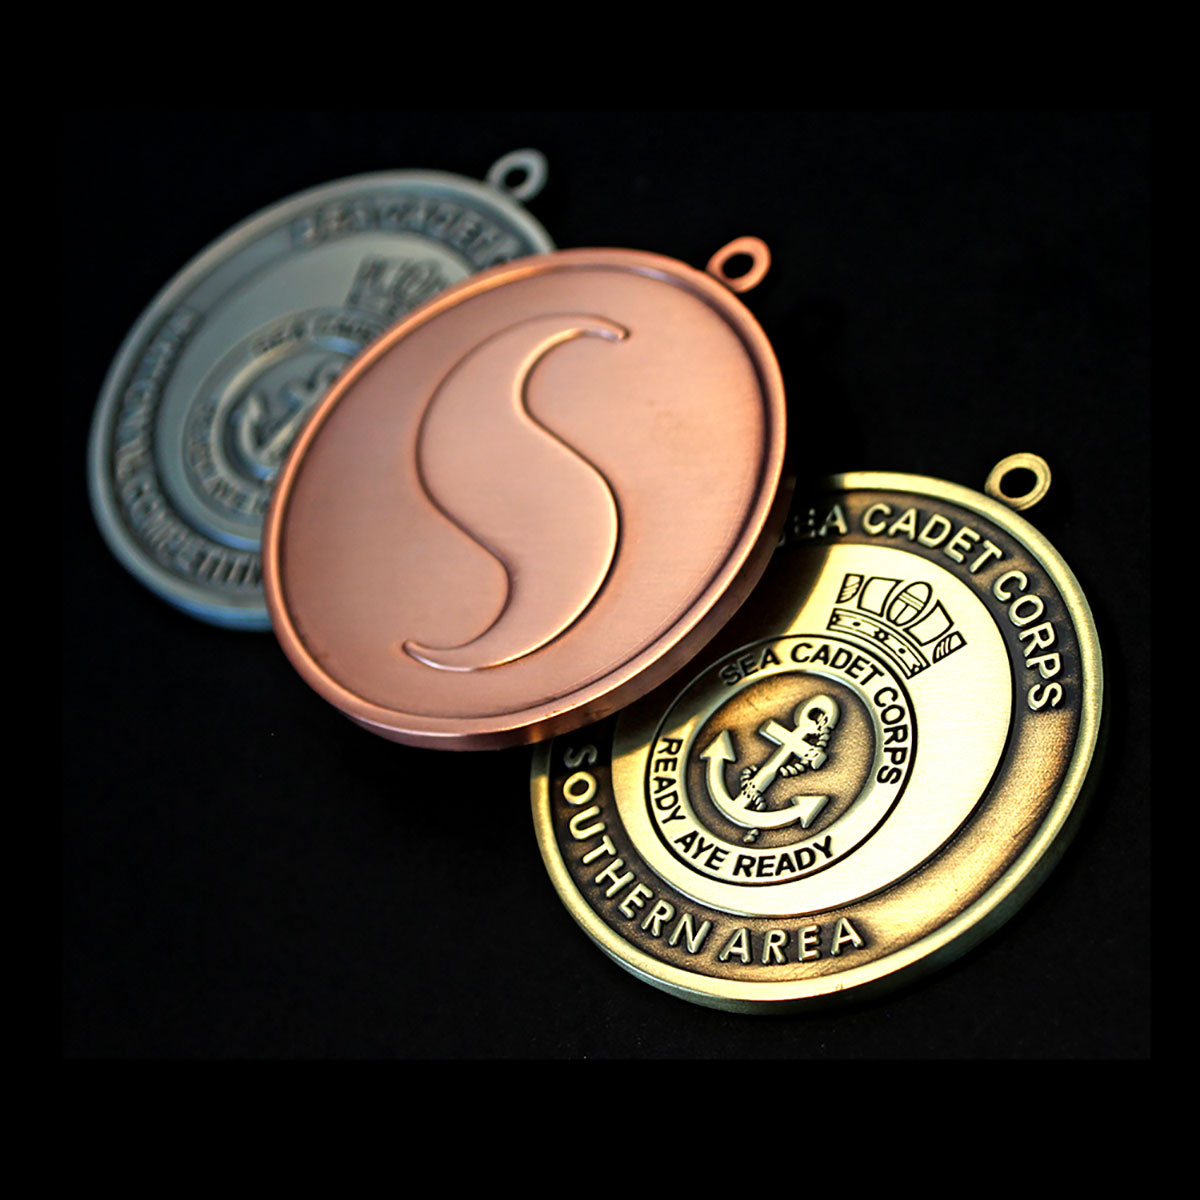 Gold Silver and Bronze Sea Cadet Corp National Competitive Events Awards Medals Obverse and Reverse